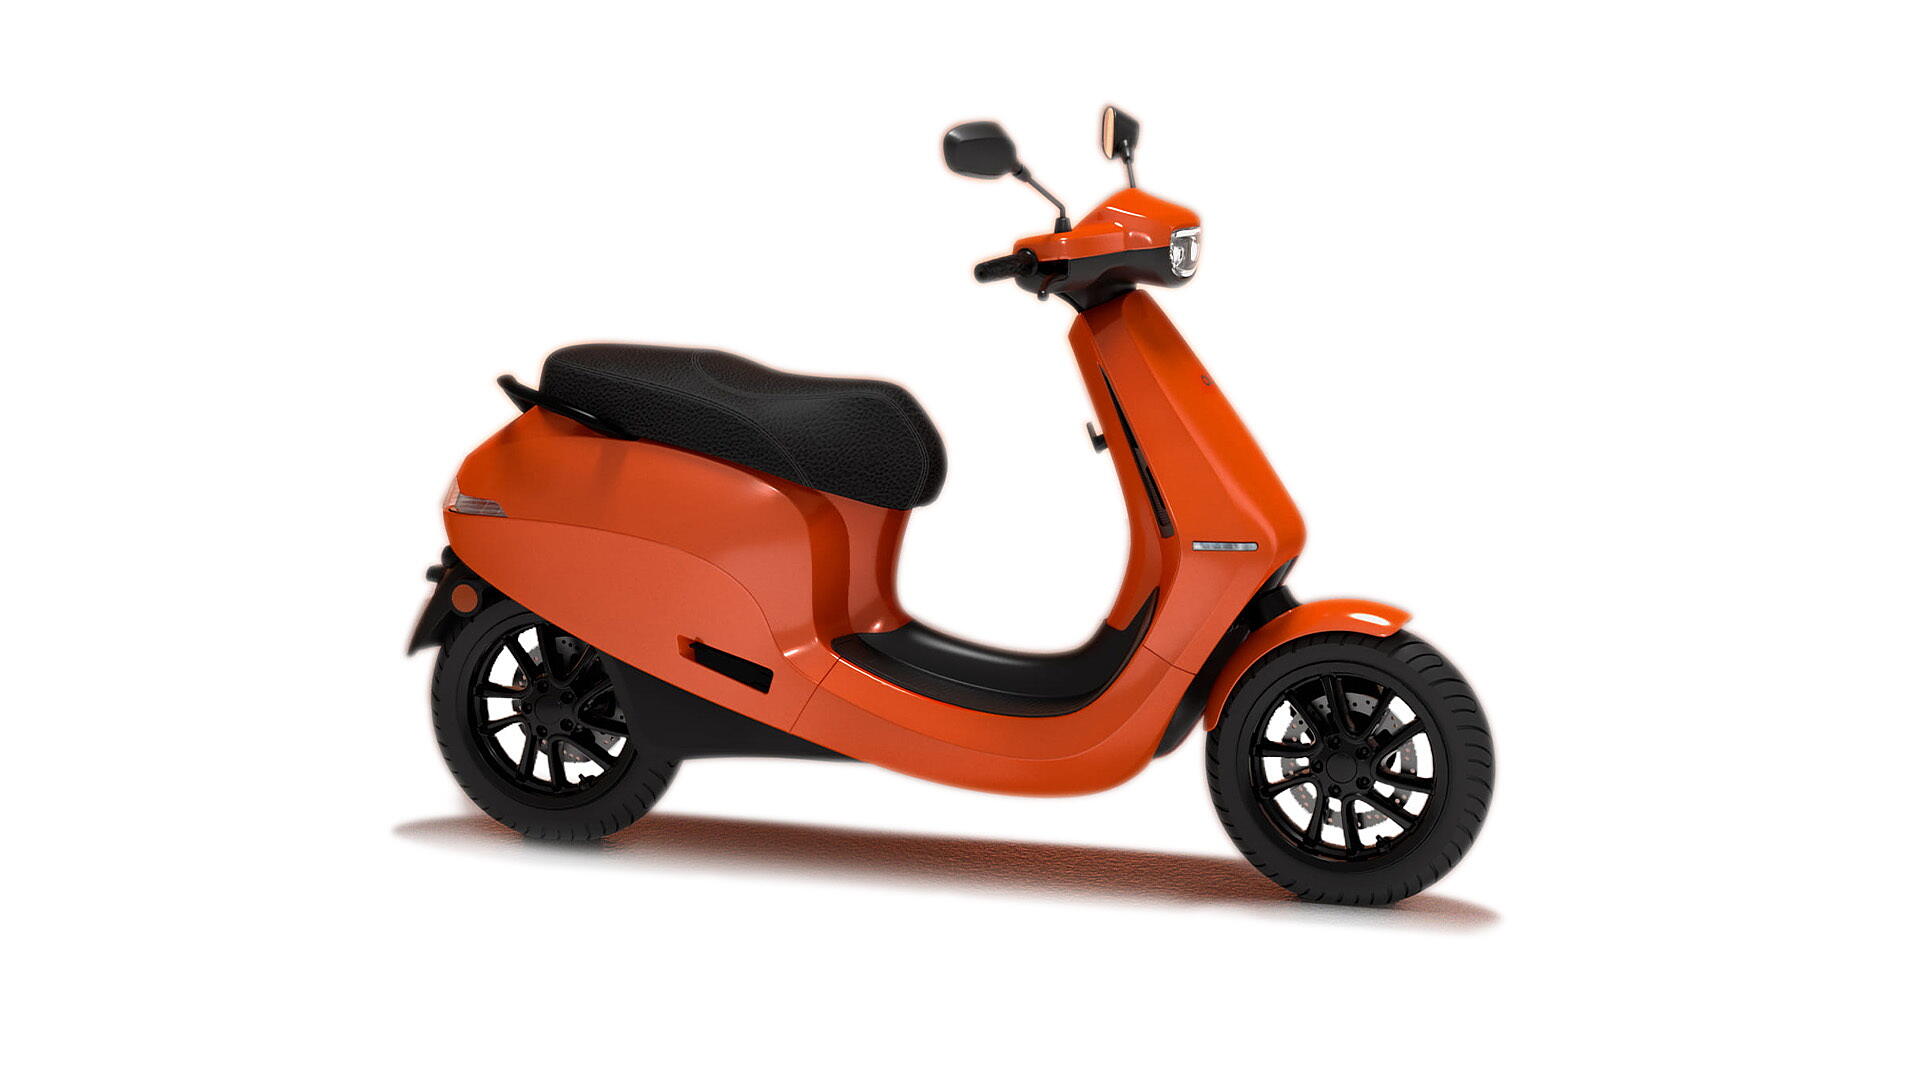 OLA Electric Scooter - OLA S1 Price, Range, Images, Colours, - BikeWale